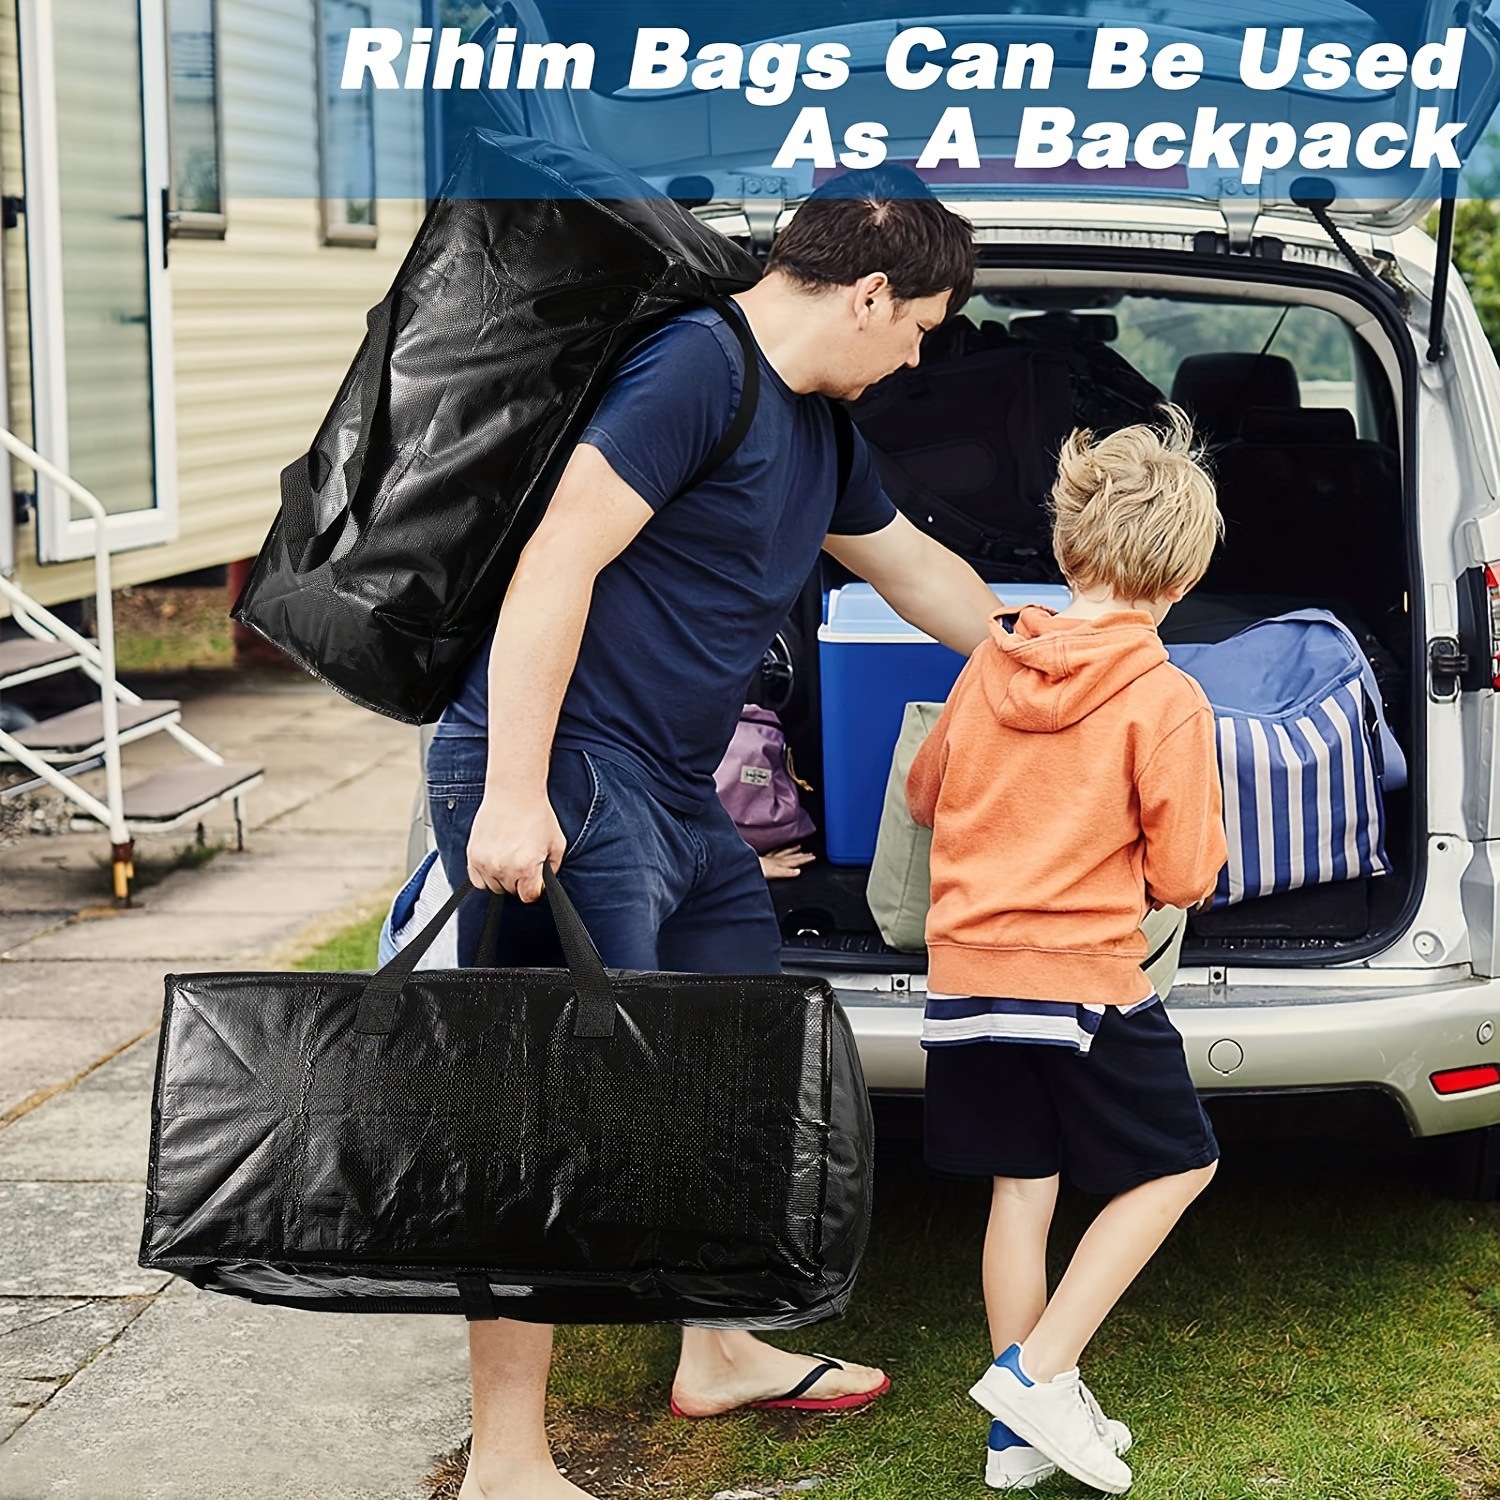 Moving Bags Heavy Duty,extra Large Pe Storage - Moving Clothing